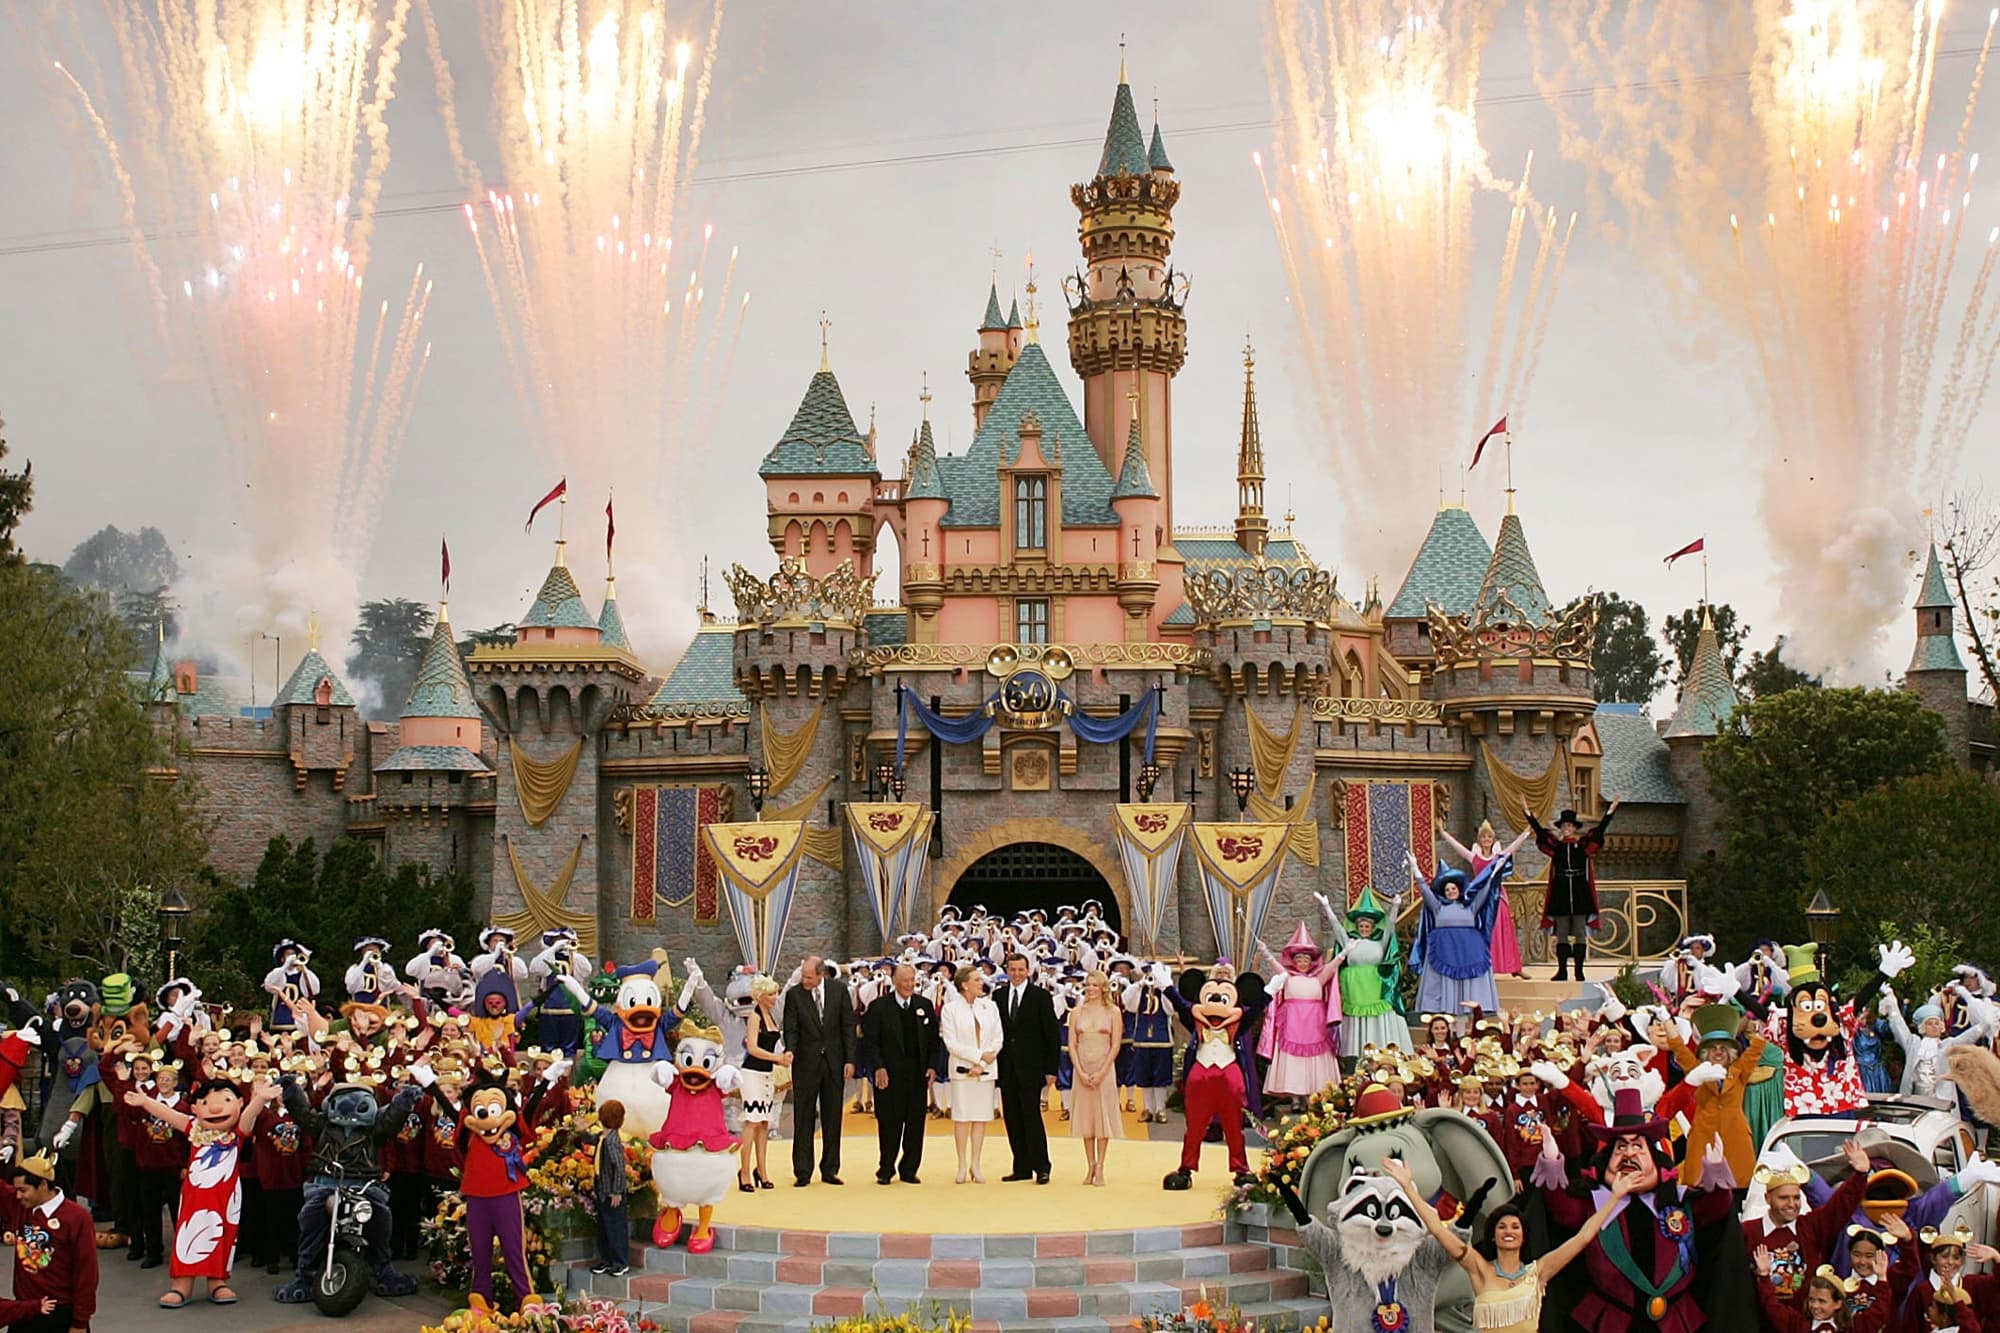 How to spend a day at Disneyland for under $5